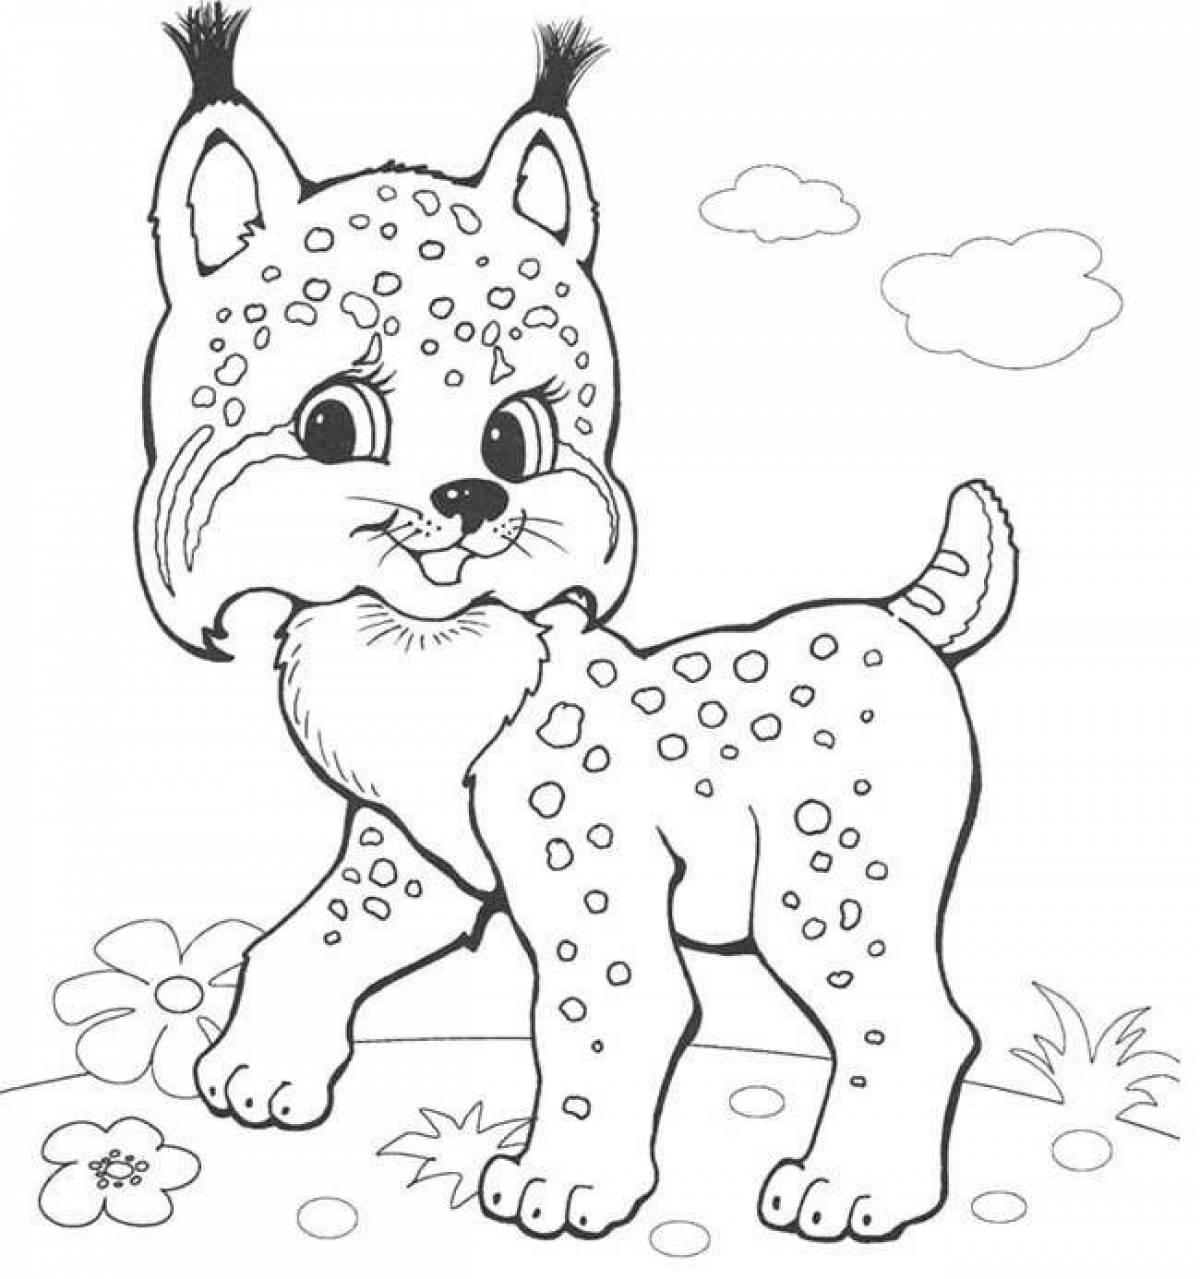 Amazing lynx coloring for babies